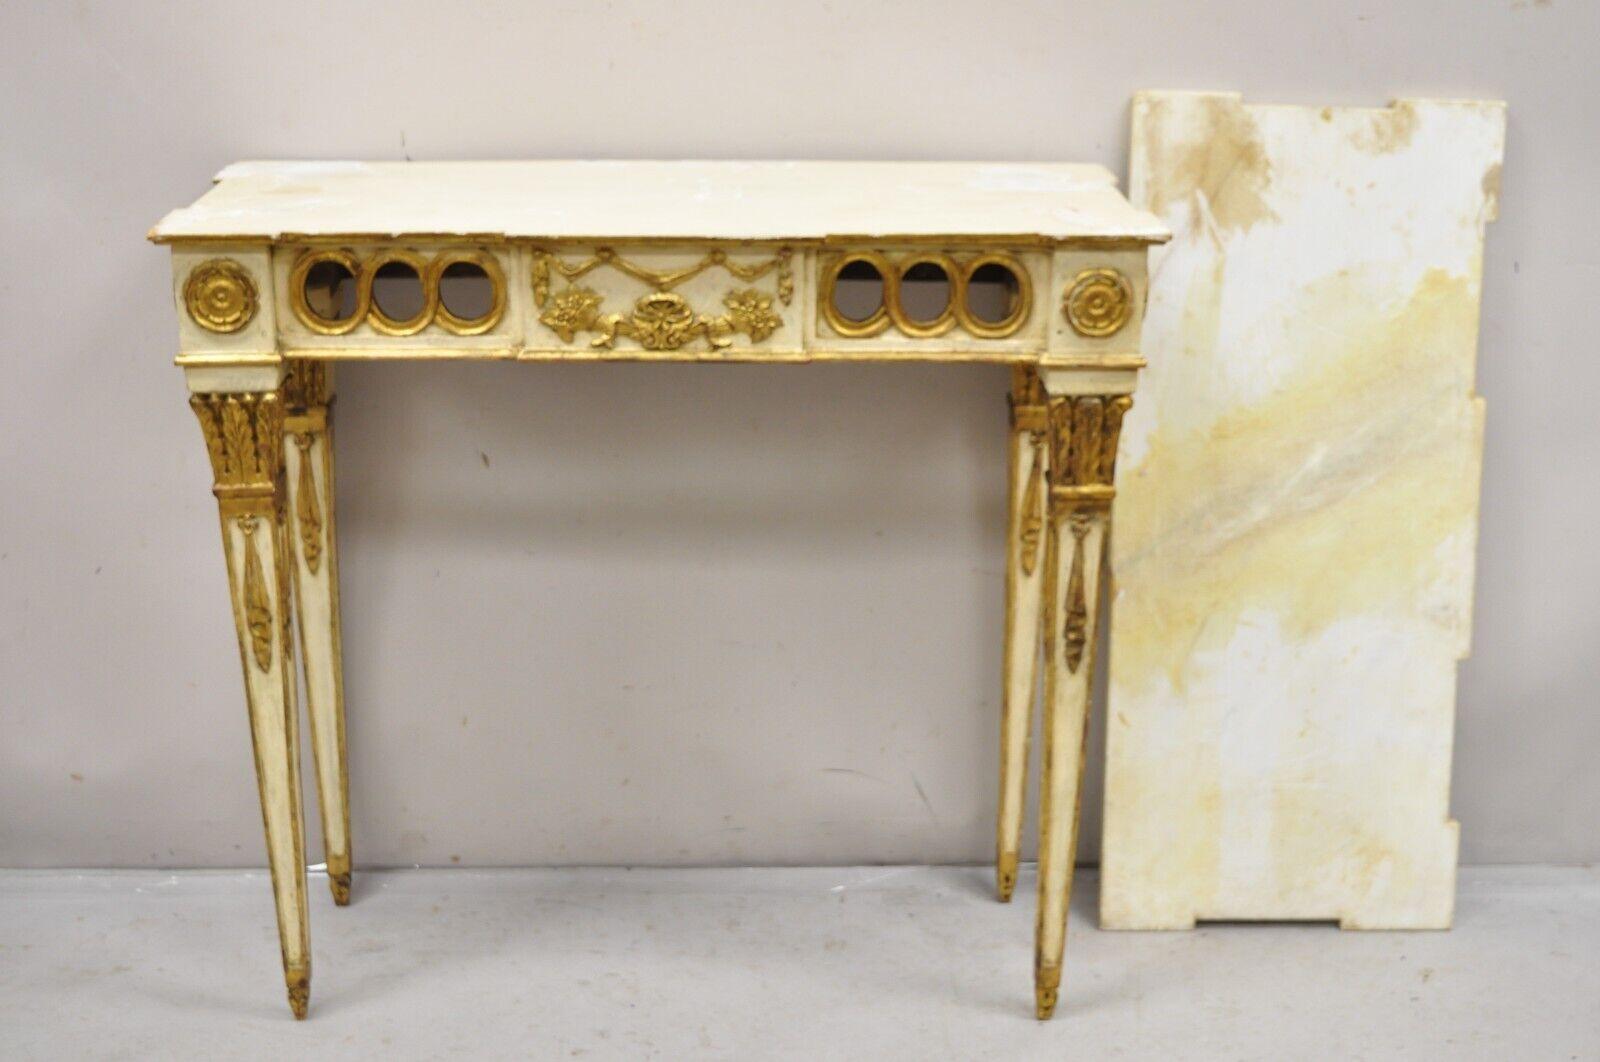 Vintage Italian Neoclassical Style Marble Top Cream and Gold Gilt Console Table For Sale 5